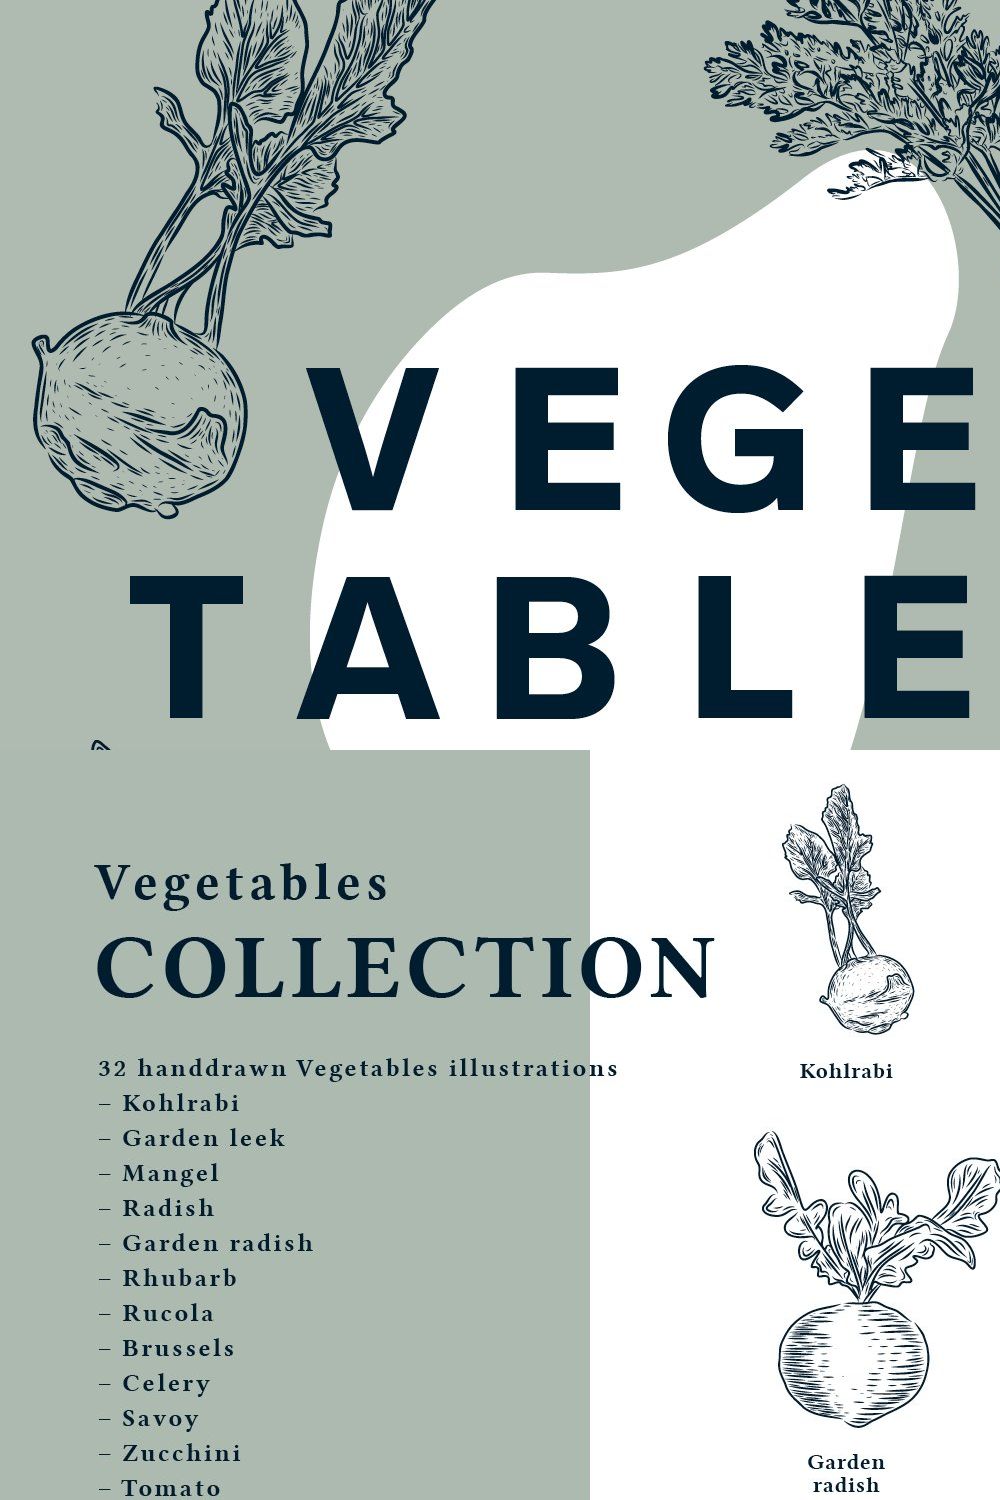 The Vegetables Collection pinterest preview image.